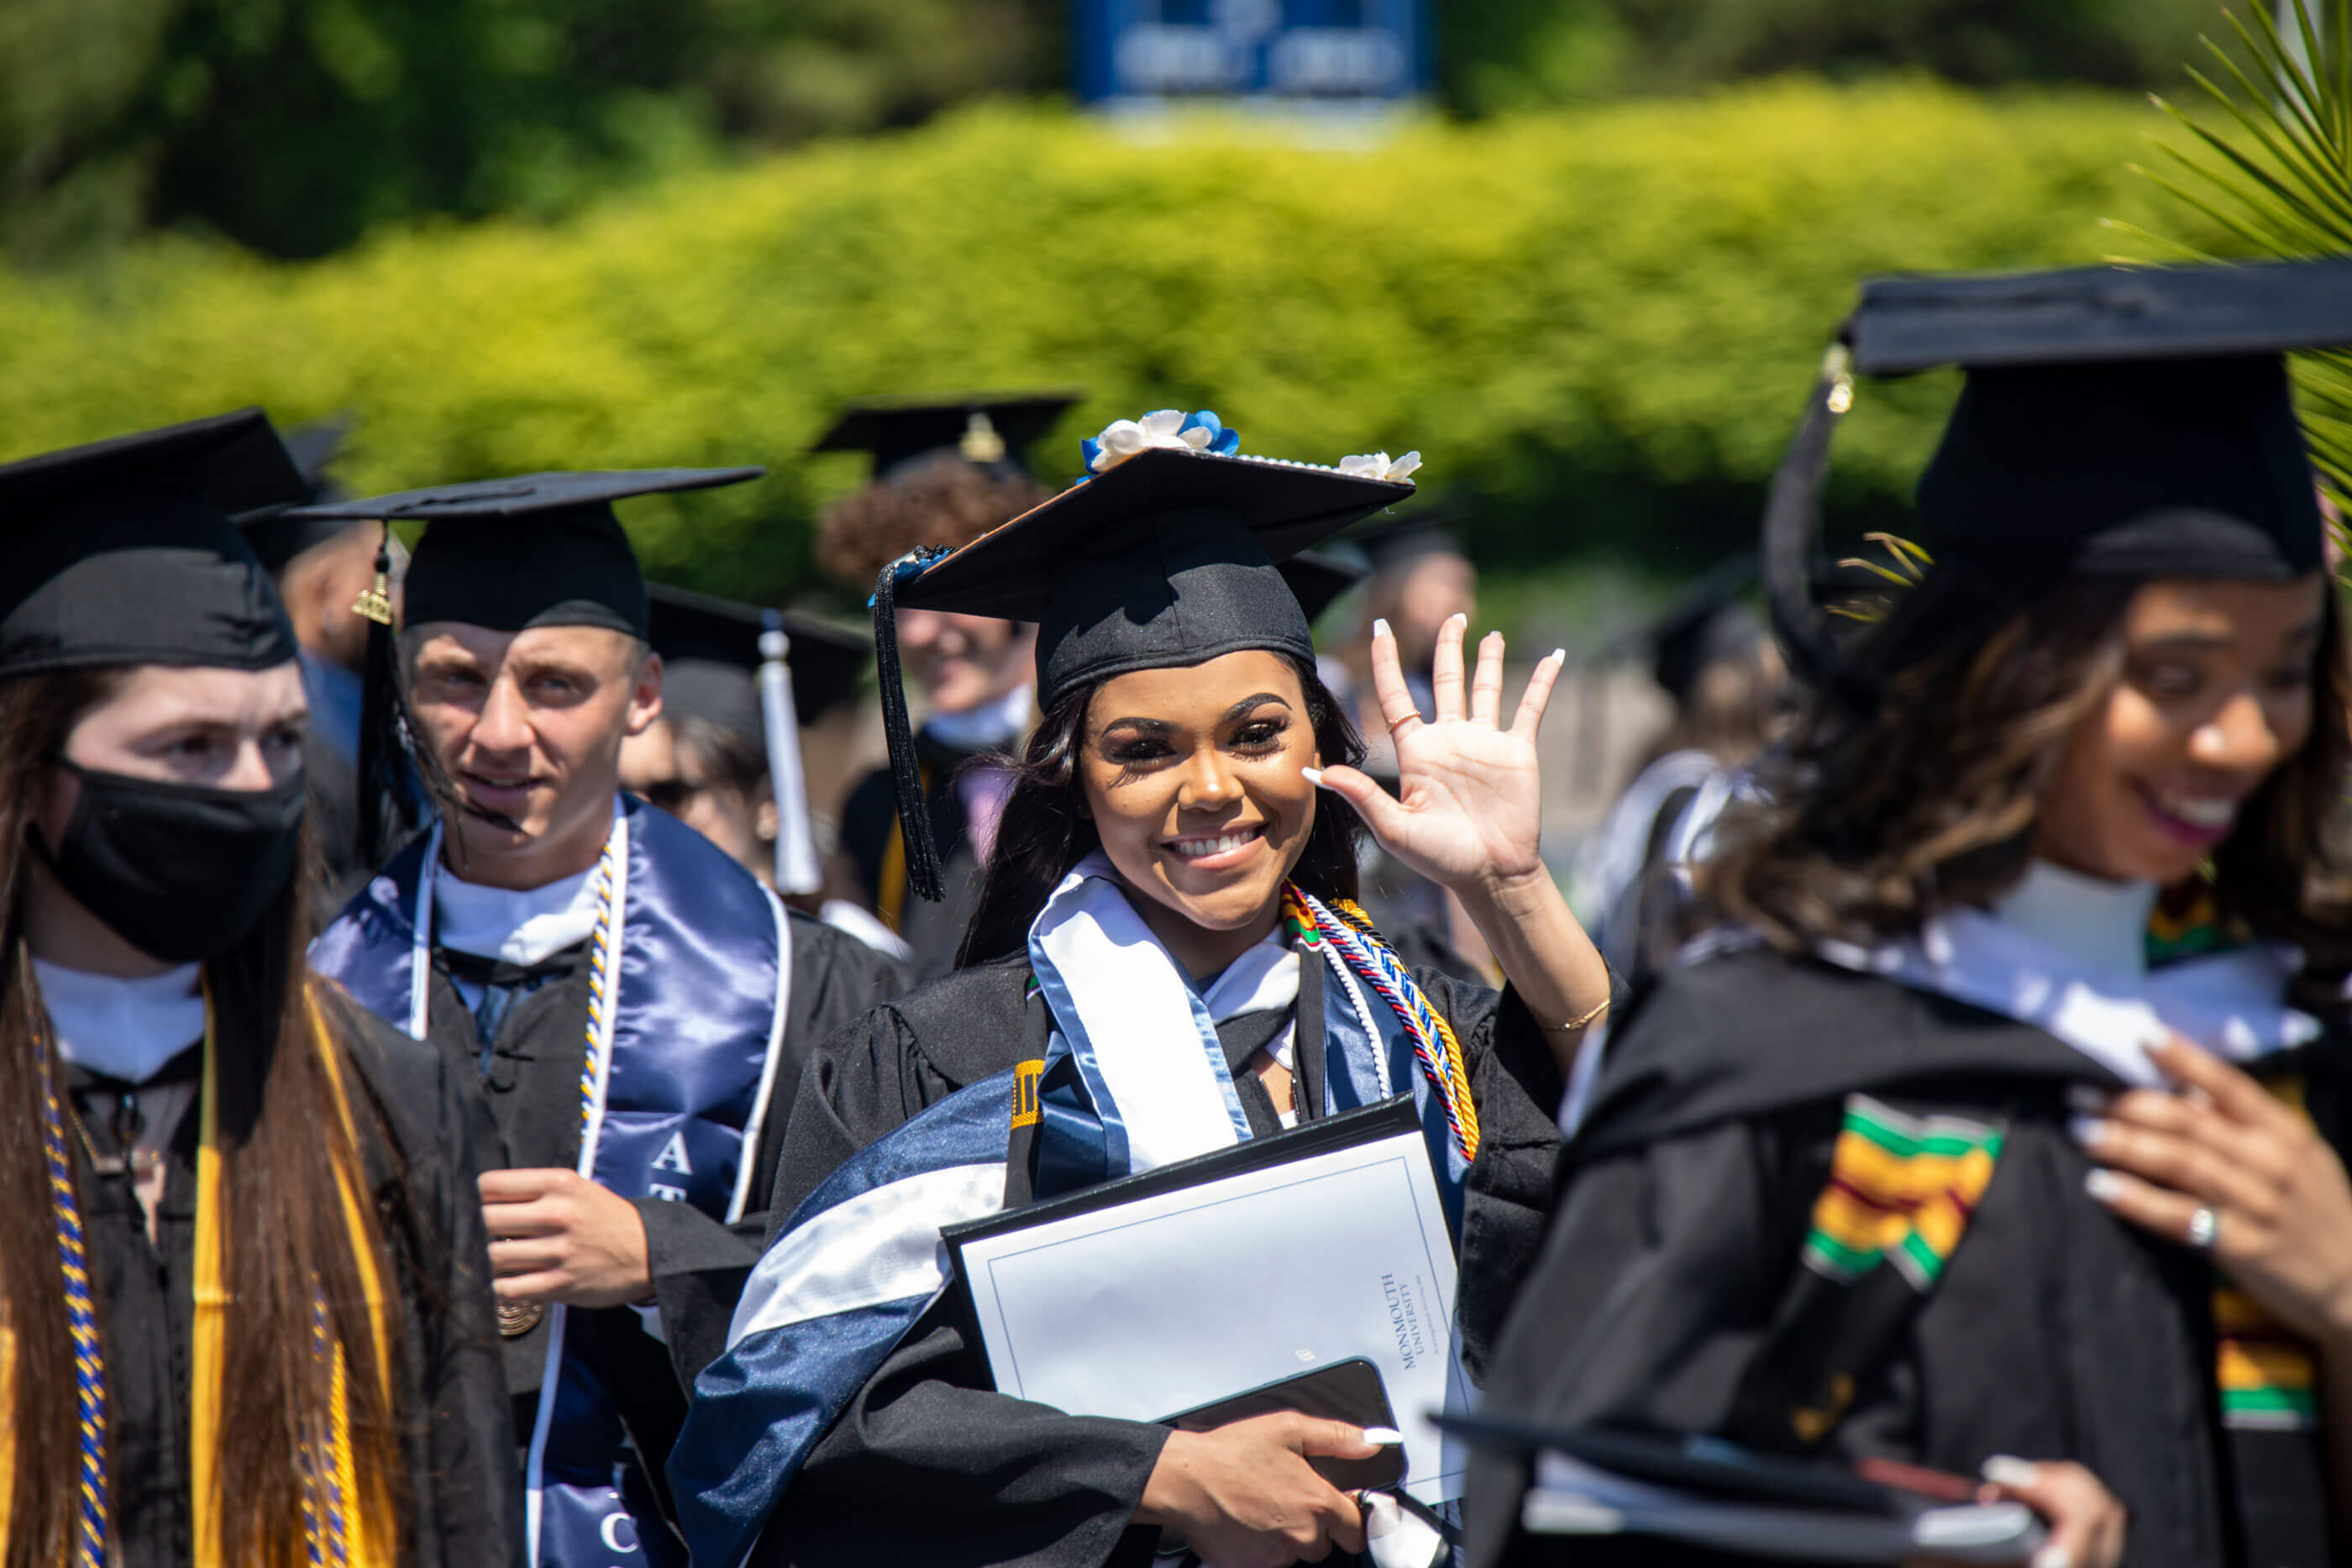 A woman holding a diploma is wearing a commencement gown and cap, she waves at the camera and is surrounded by other smiling graduates